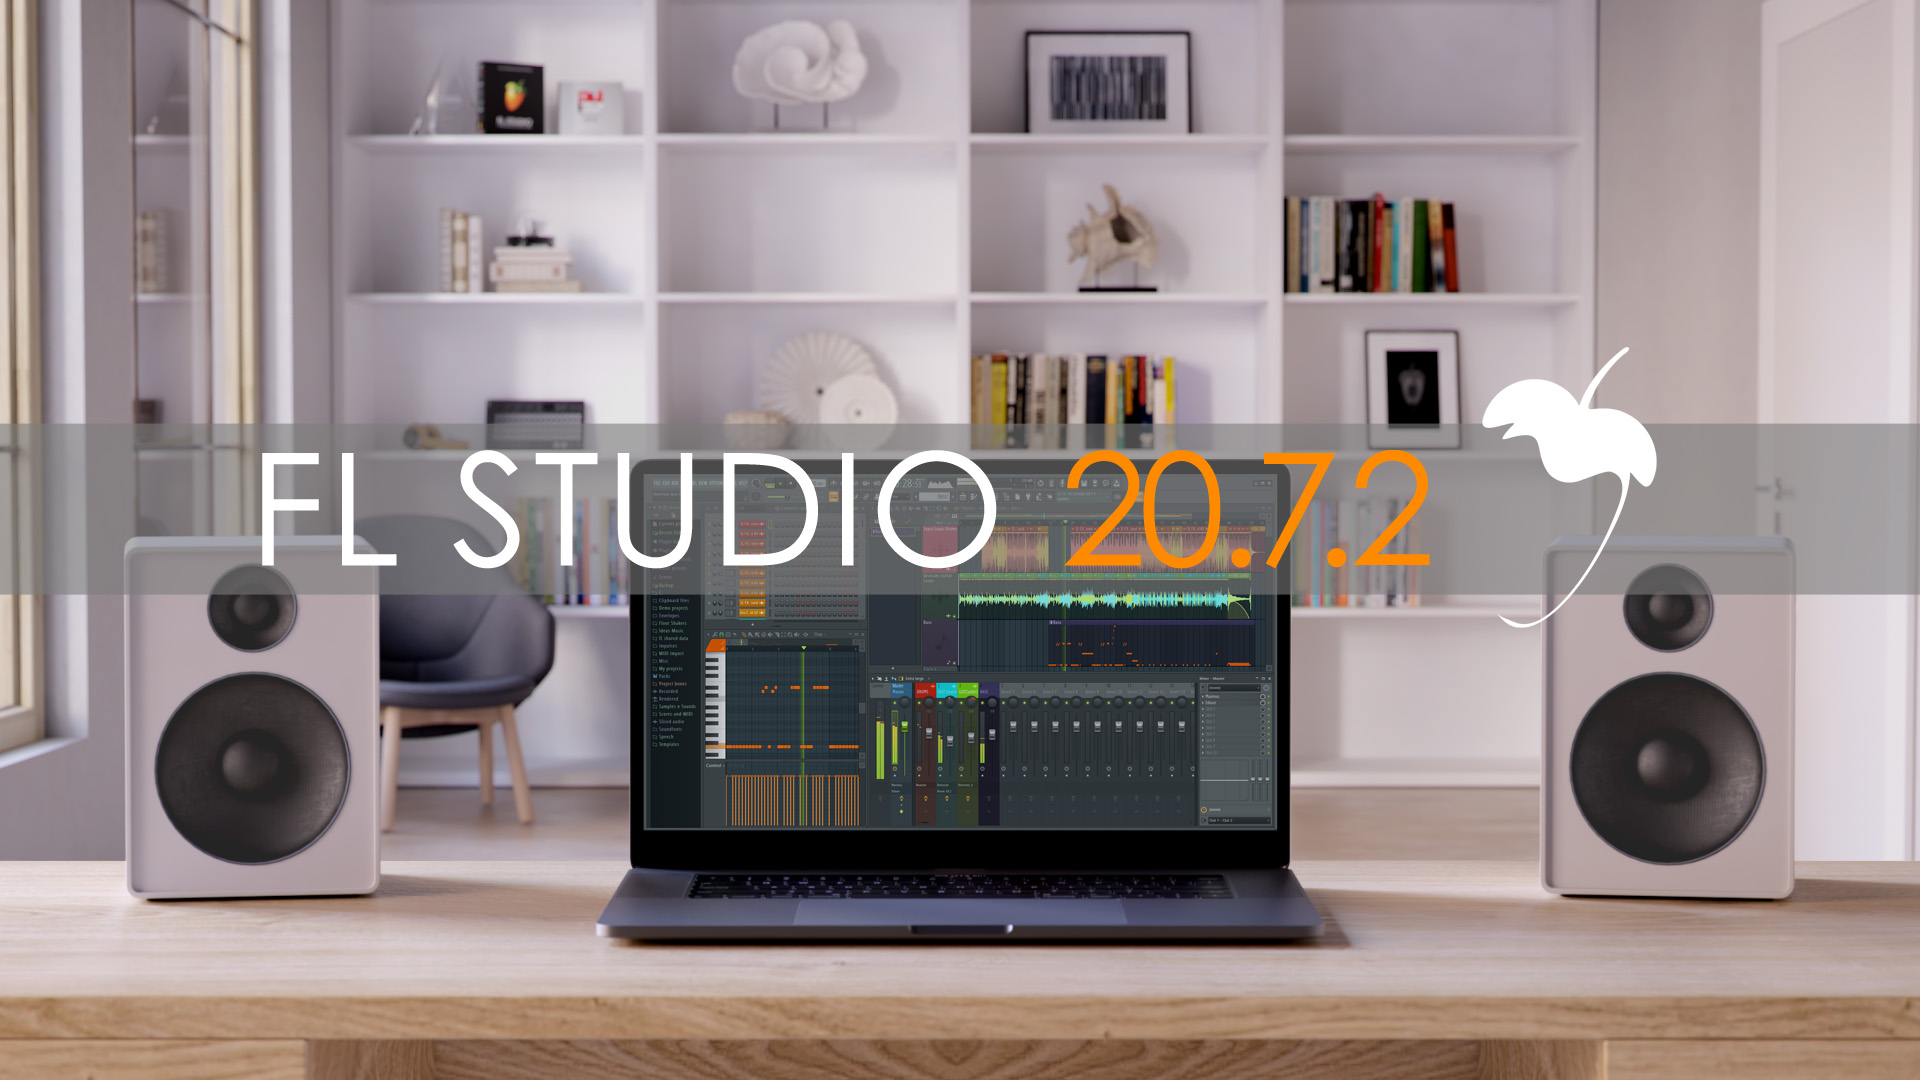 FL Studio 20.7.2 is now available